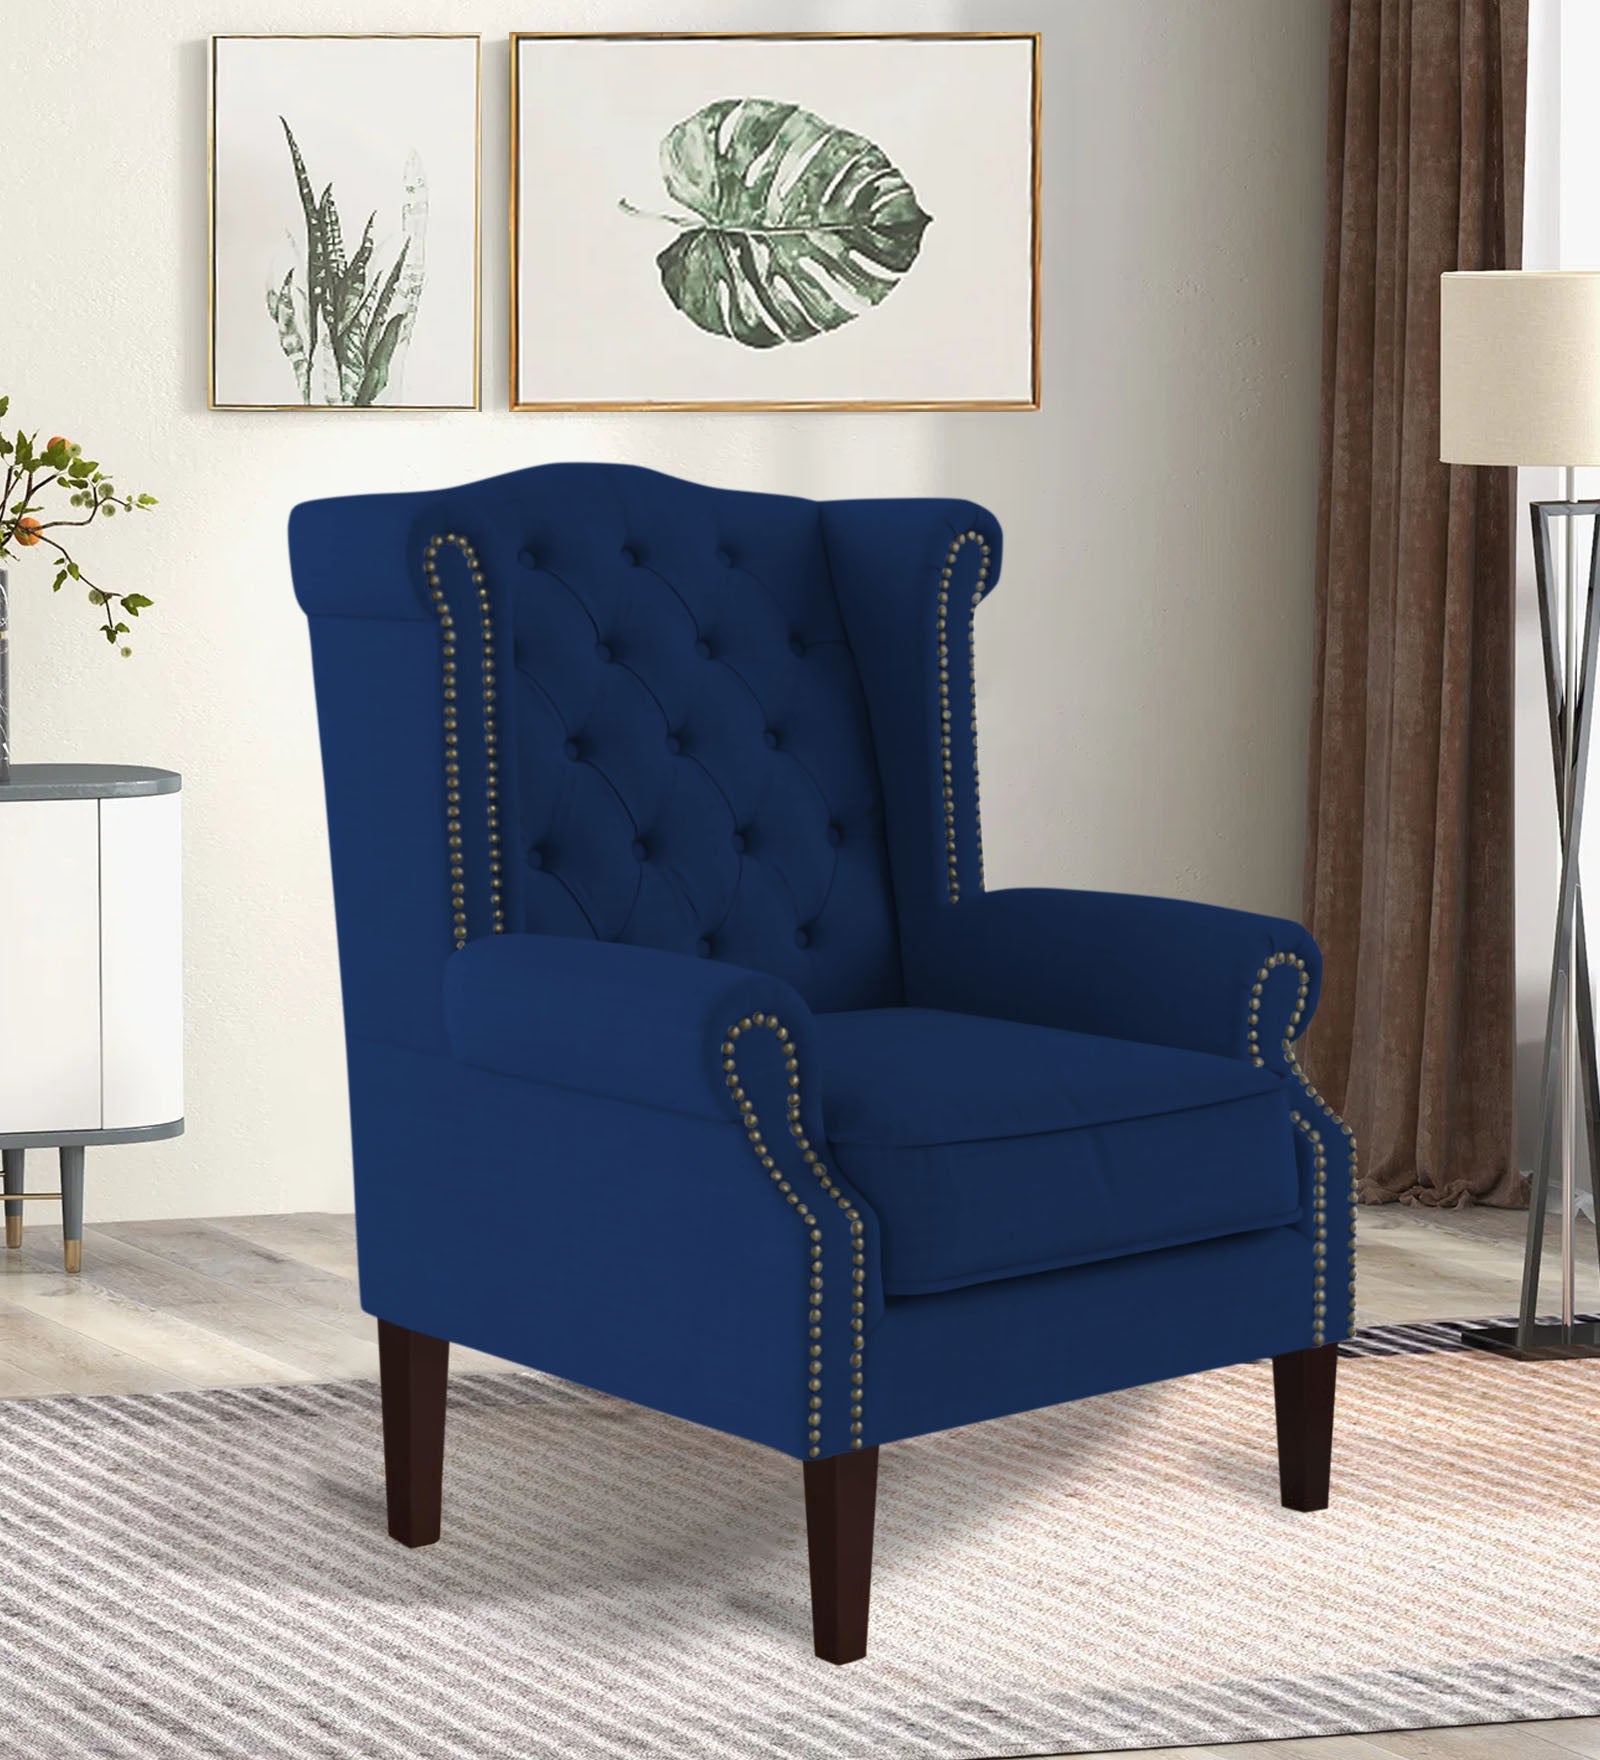 Nottage Fabric Wing Chair in Royal Blue Colour